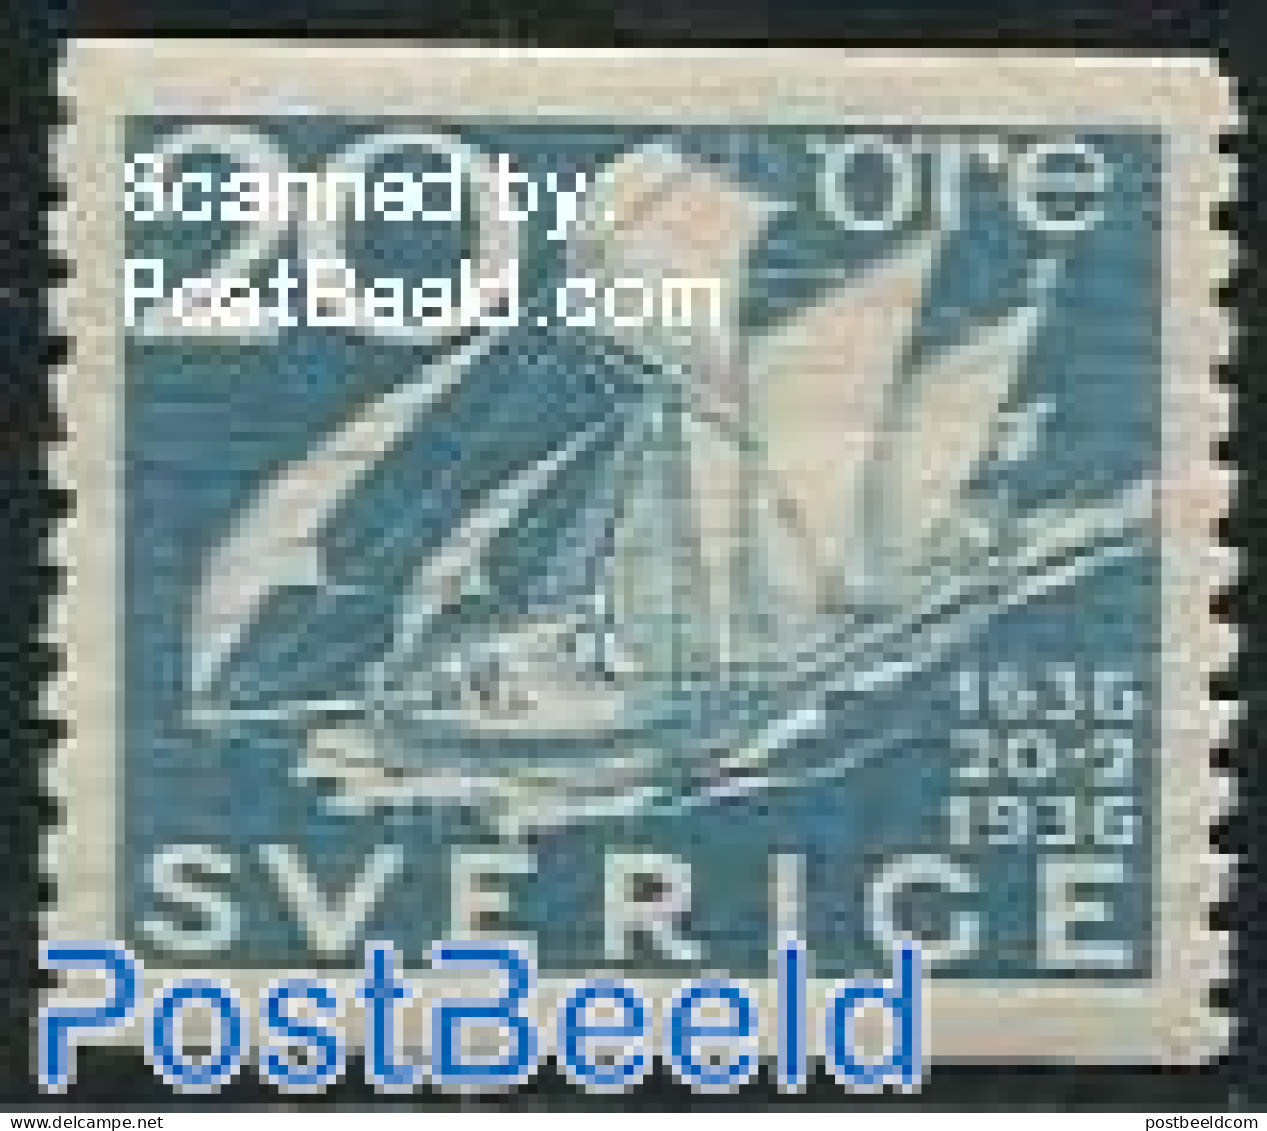 Sweden 1936 20o, Stamp Out Of Set, Unused (hinged), Transport - Post - Ships And Boats - Ongebruikt